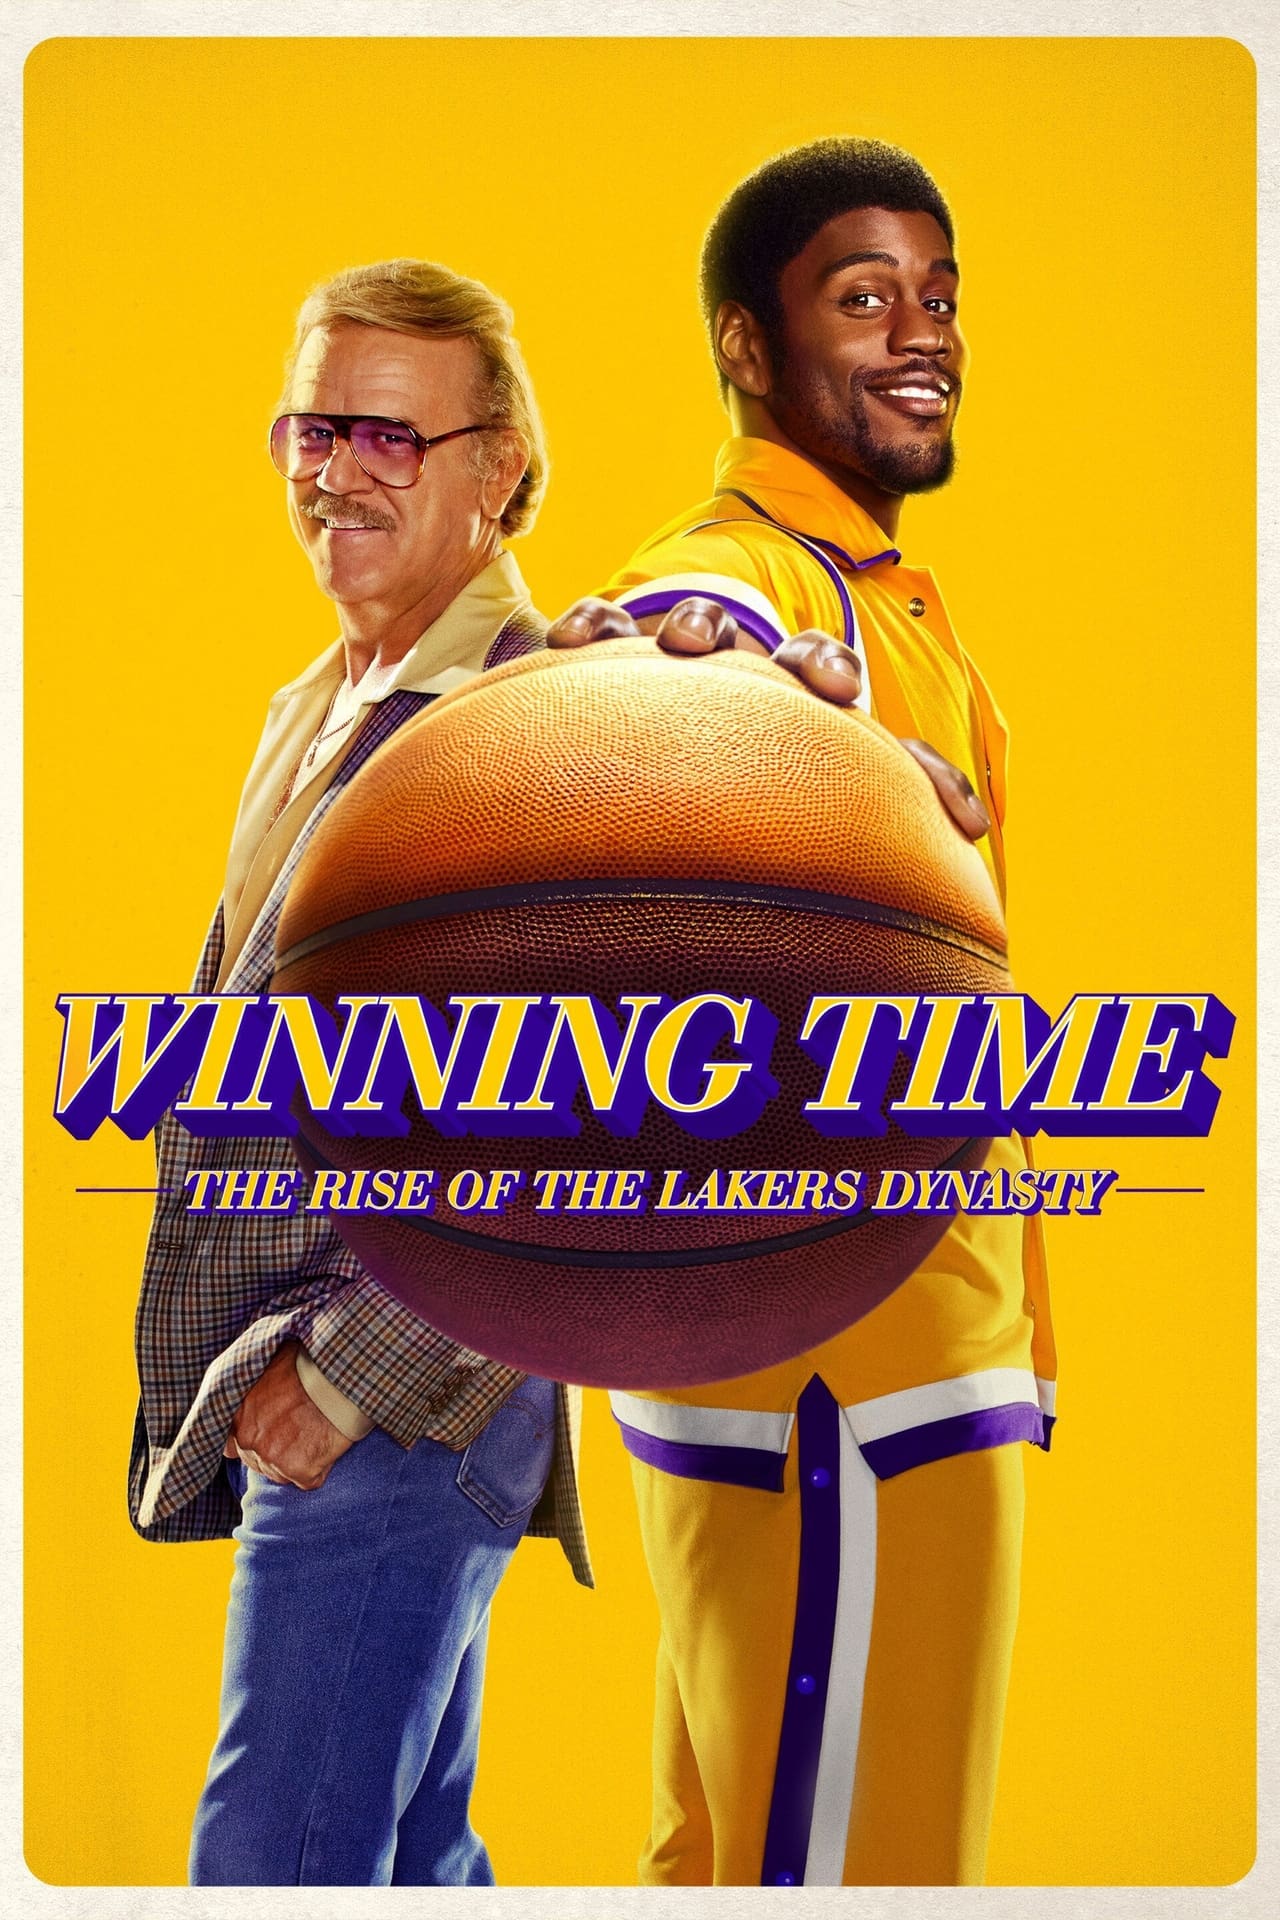 Winning Time: The Rise of the Lakers Dynasty (season 1)